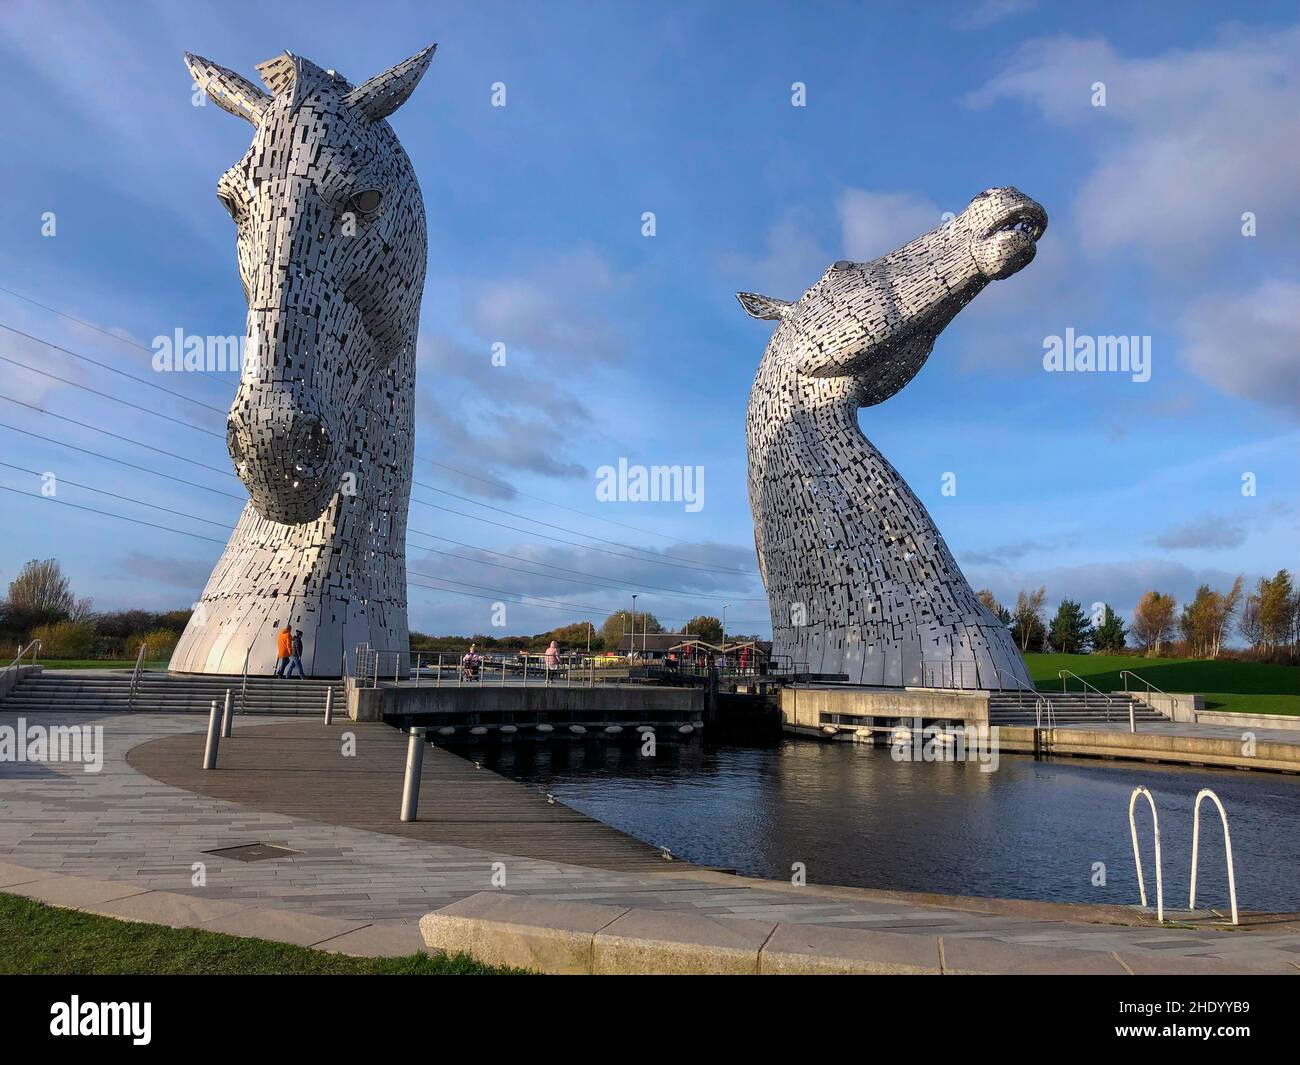 The Kelpies in Falkirk, Scotland. Two 30m high (98ft) horse-head sculptures depicting kelpies (shape-shifting water spirits). They stand next to a new Stock Photo